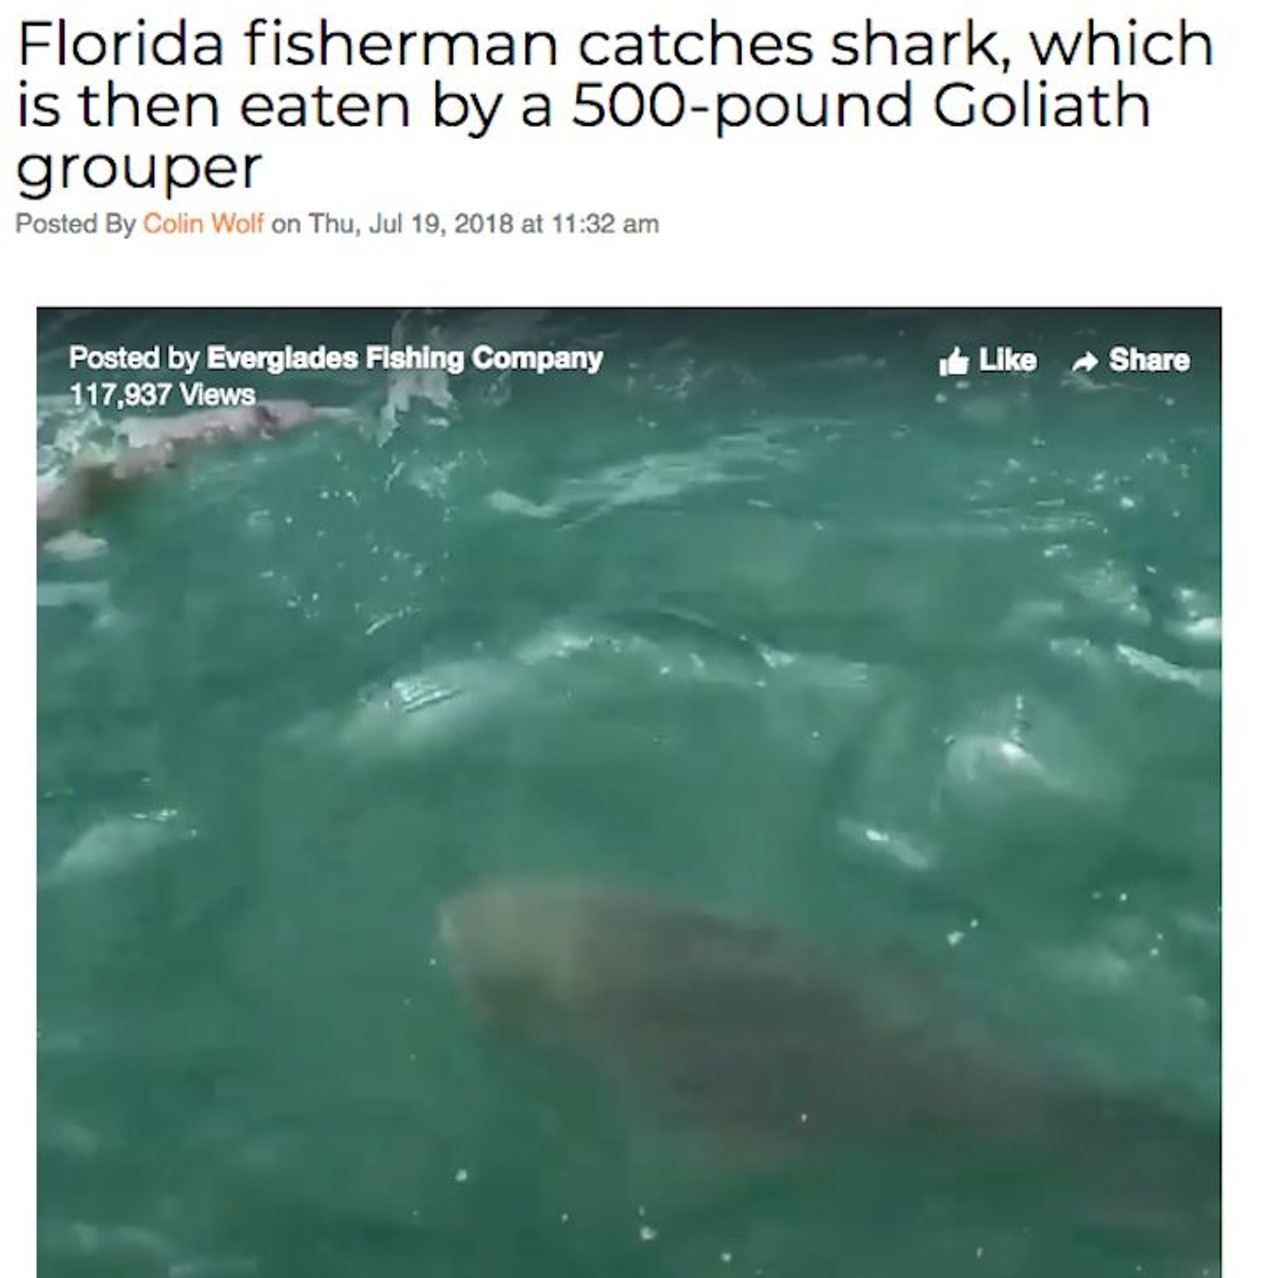 While reeling in a 3-foot shark, a Florida fisherman helplessly watched as his catch was devoured by a massive 500-pound Goliath grouper. Read more here.